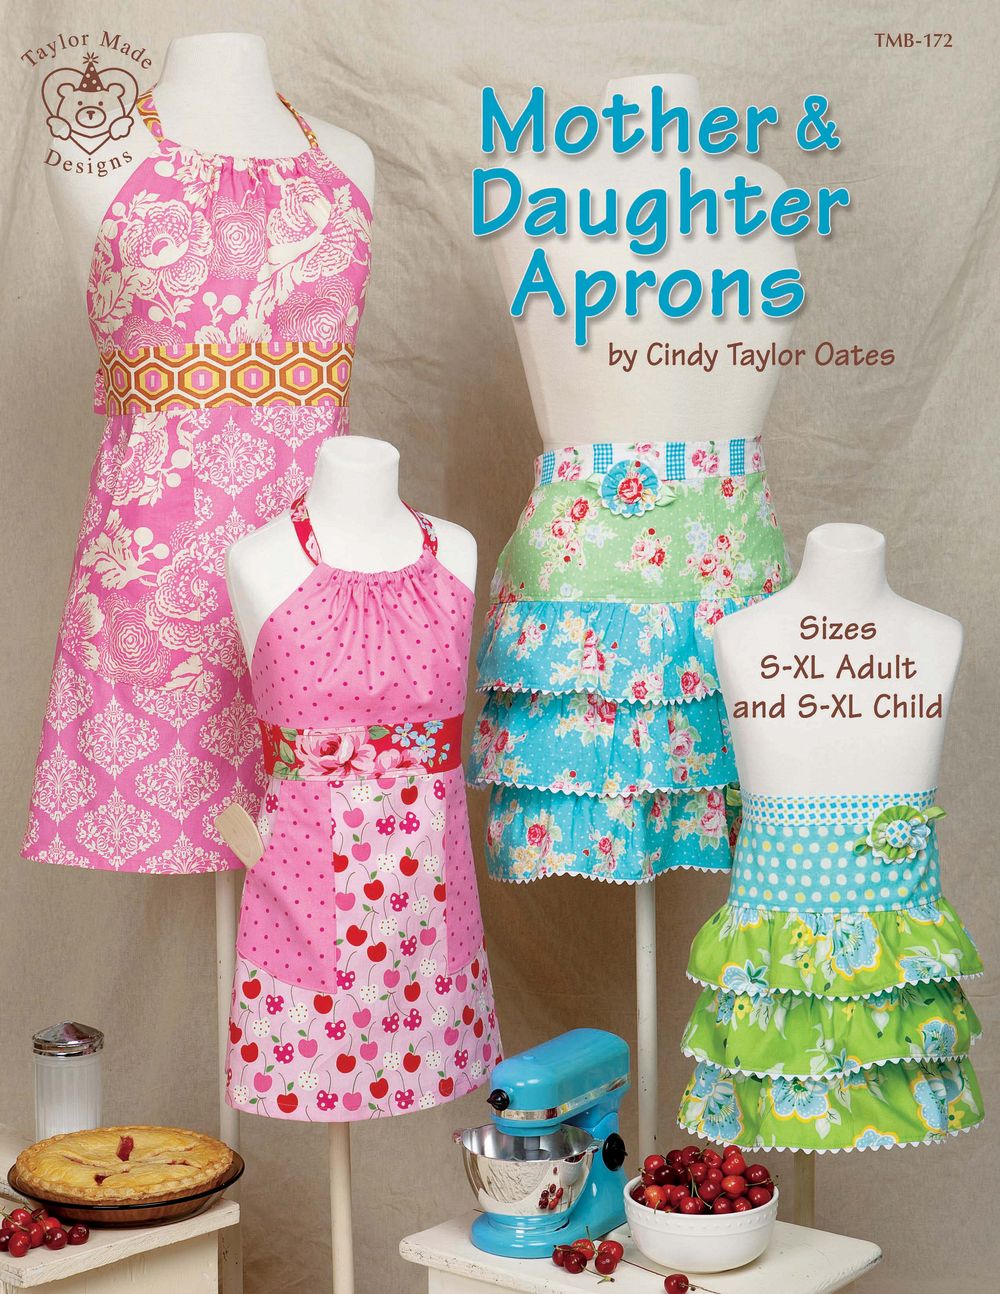 Mother & Daughter Aprons Sewing Pattern Book by Cindy Taylor Oates of Taylor Made Designs